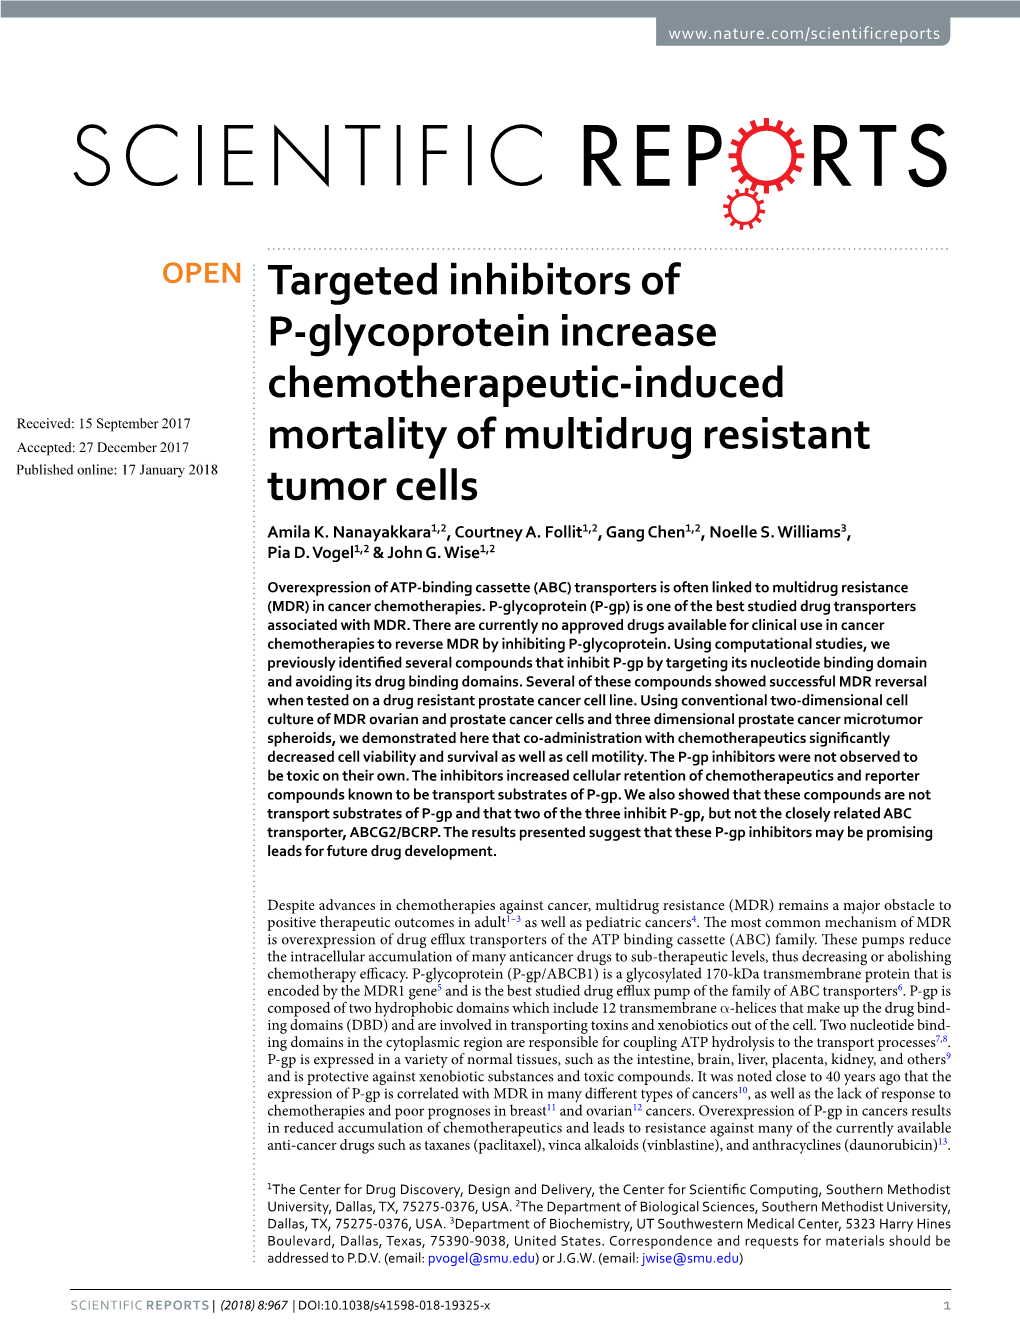 Targeted Inhibitors of P-Glycoprotein Increase Chemotherapeutic